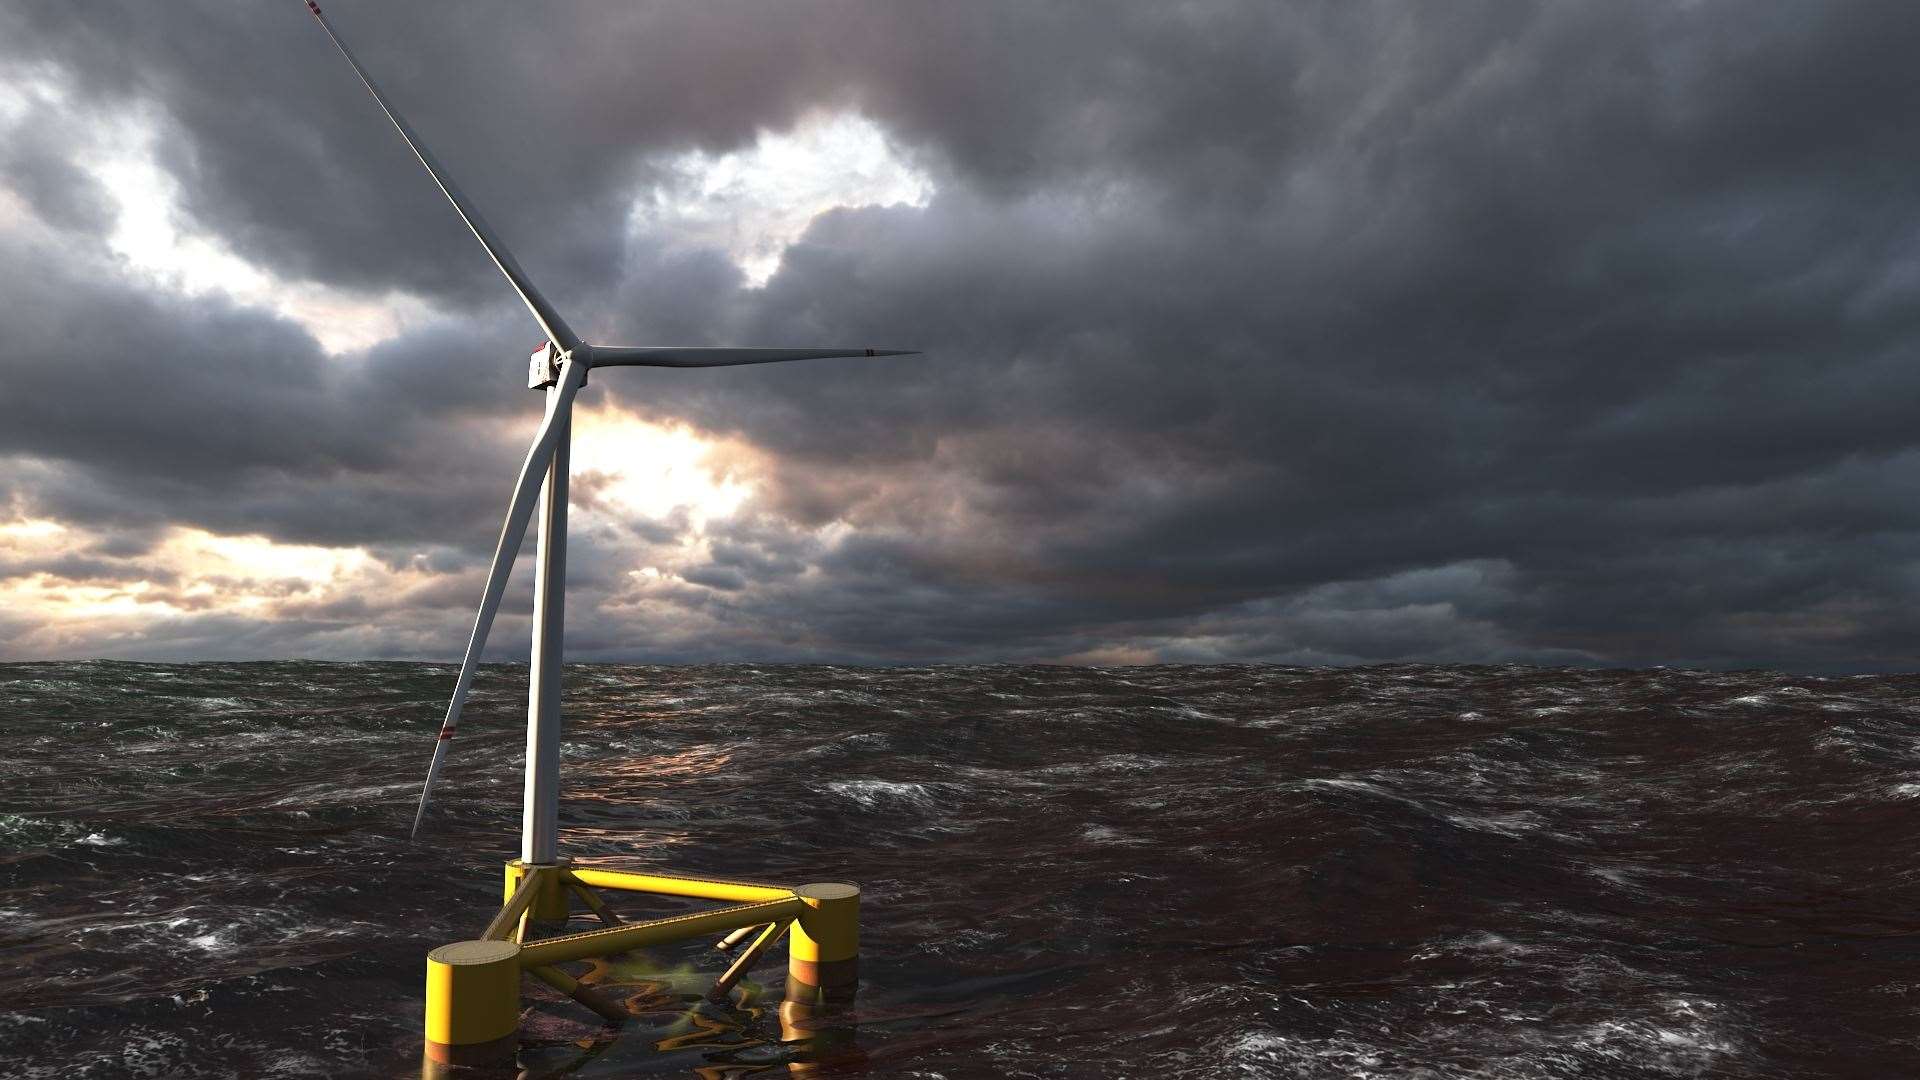 Plans are being submitted for a 6GW windfarm in the Moray Firth